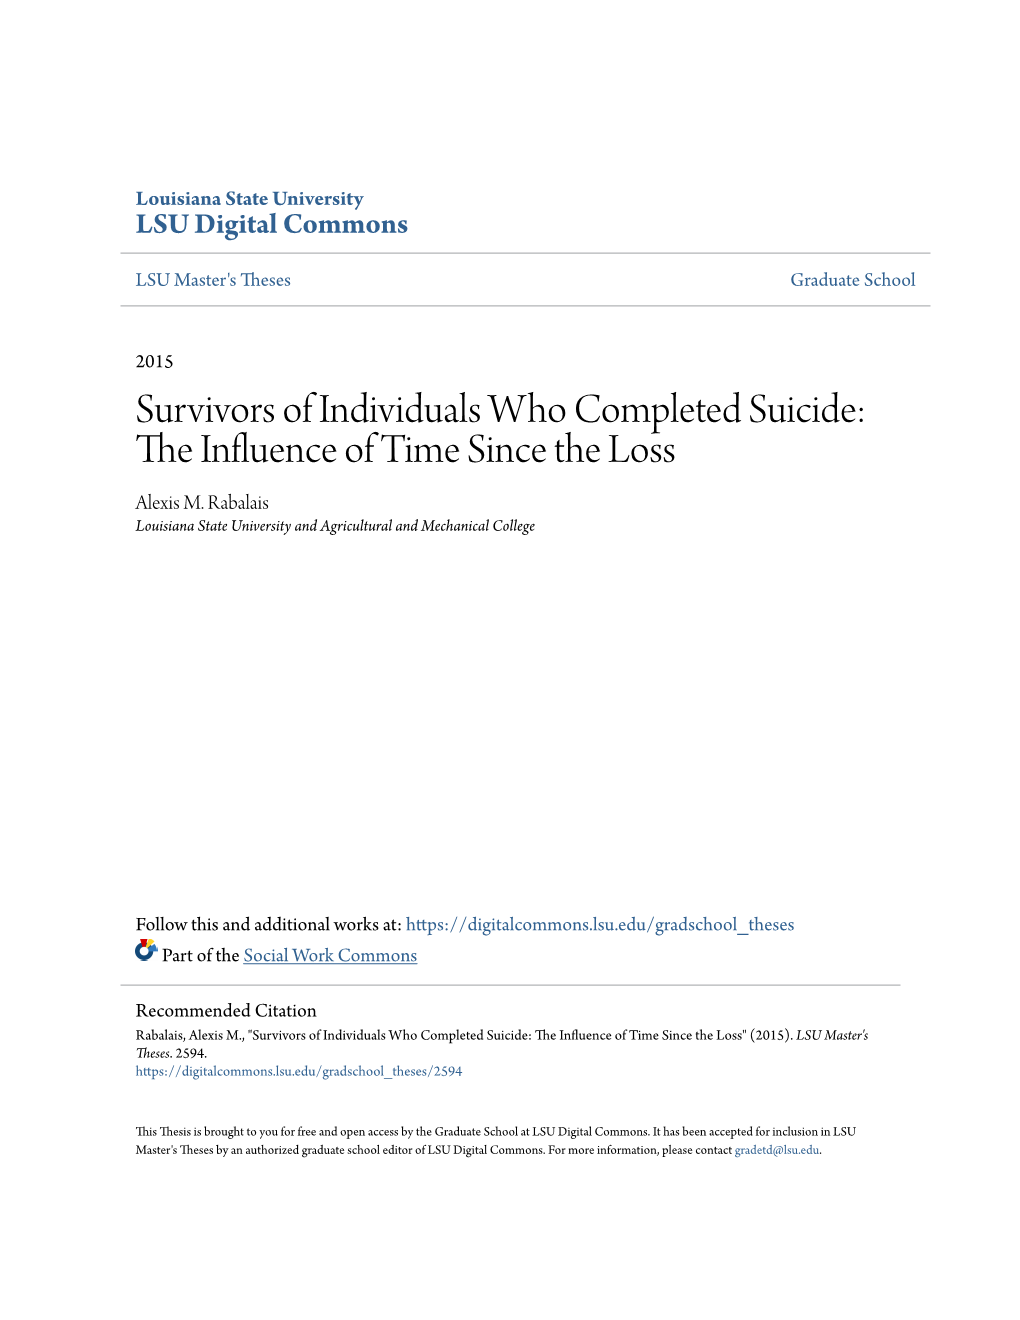 Survivors of Individuals Who Completed Suicide: the Nfluei Nce of Time Since the Loss Alexis M